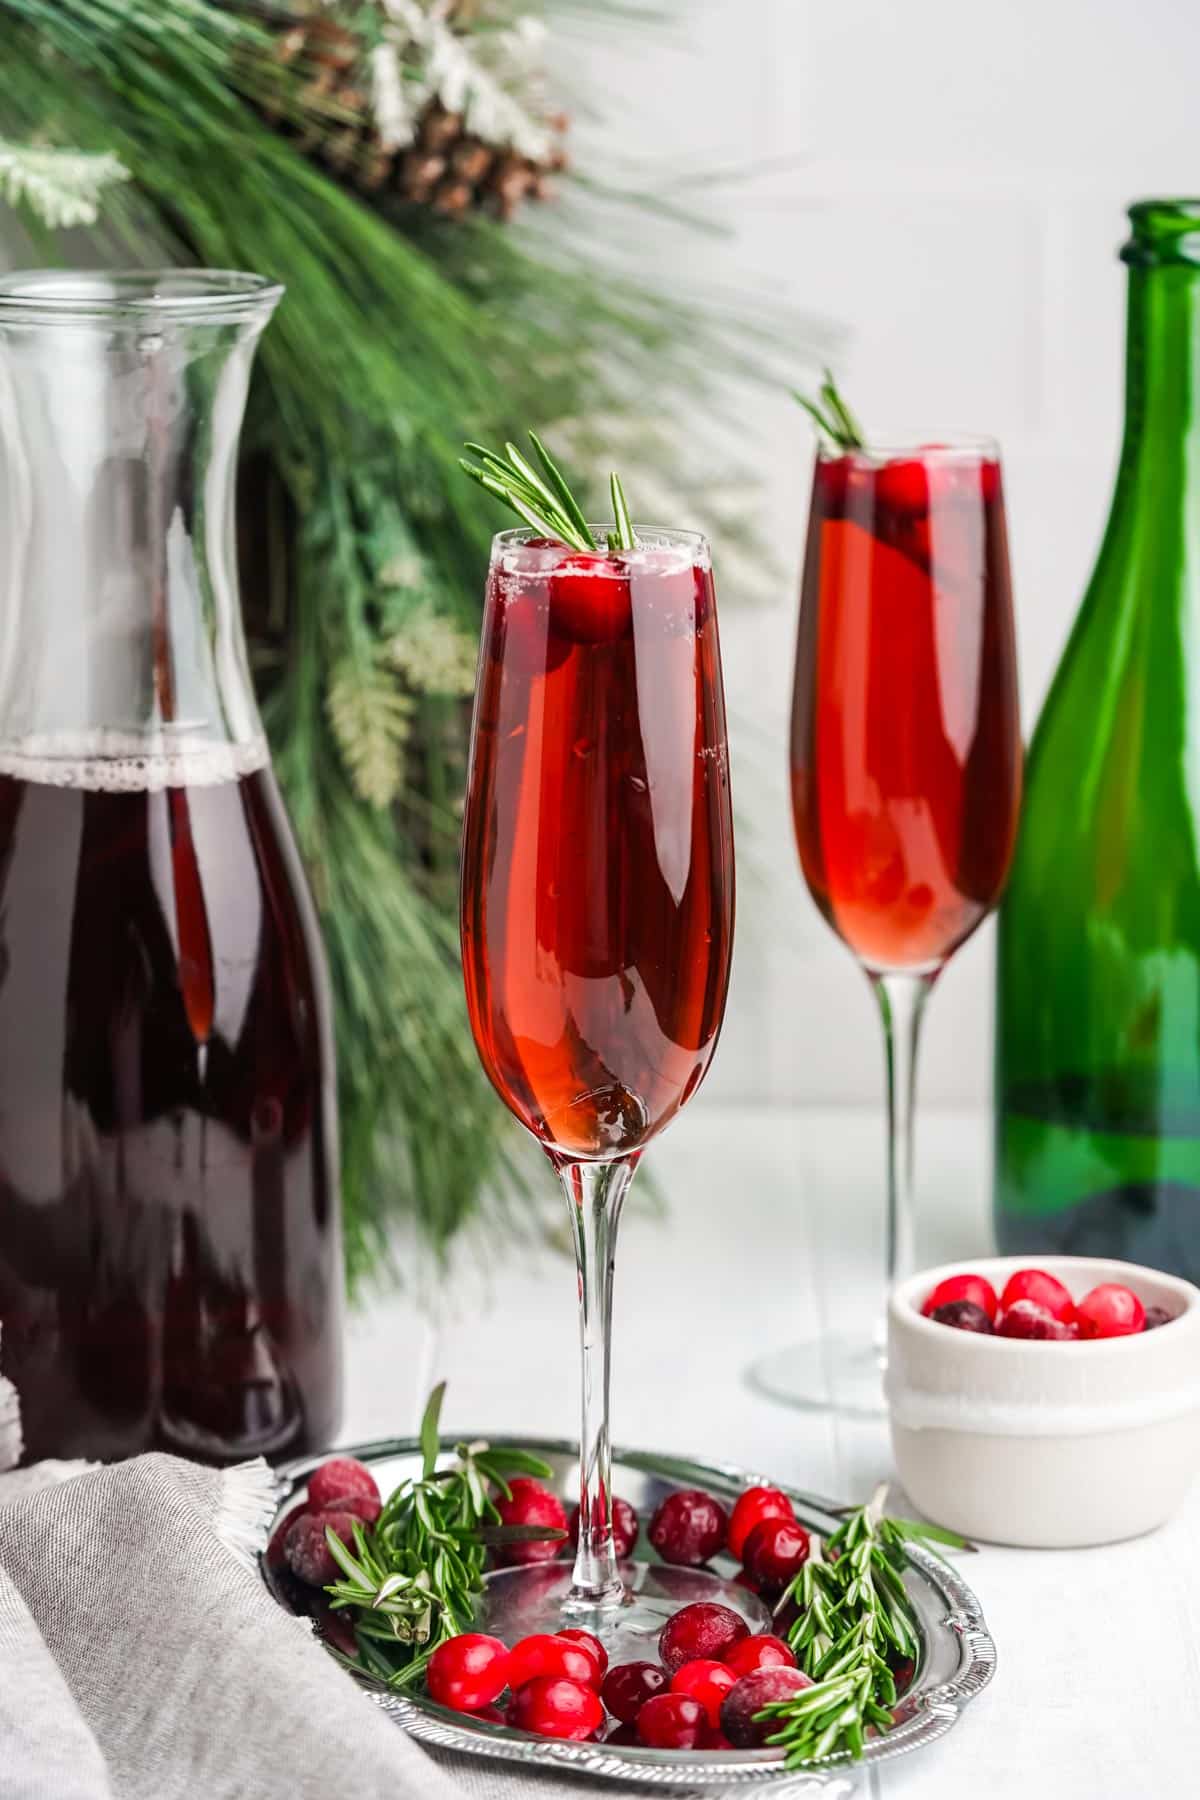 Two glasses of cranberry mimosa on the table with a bowl of fresh cranberries and carafe of juice.